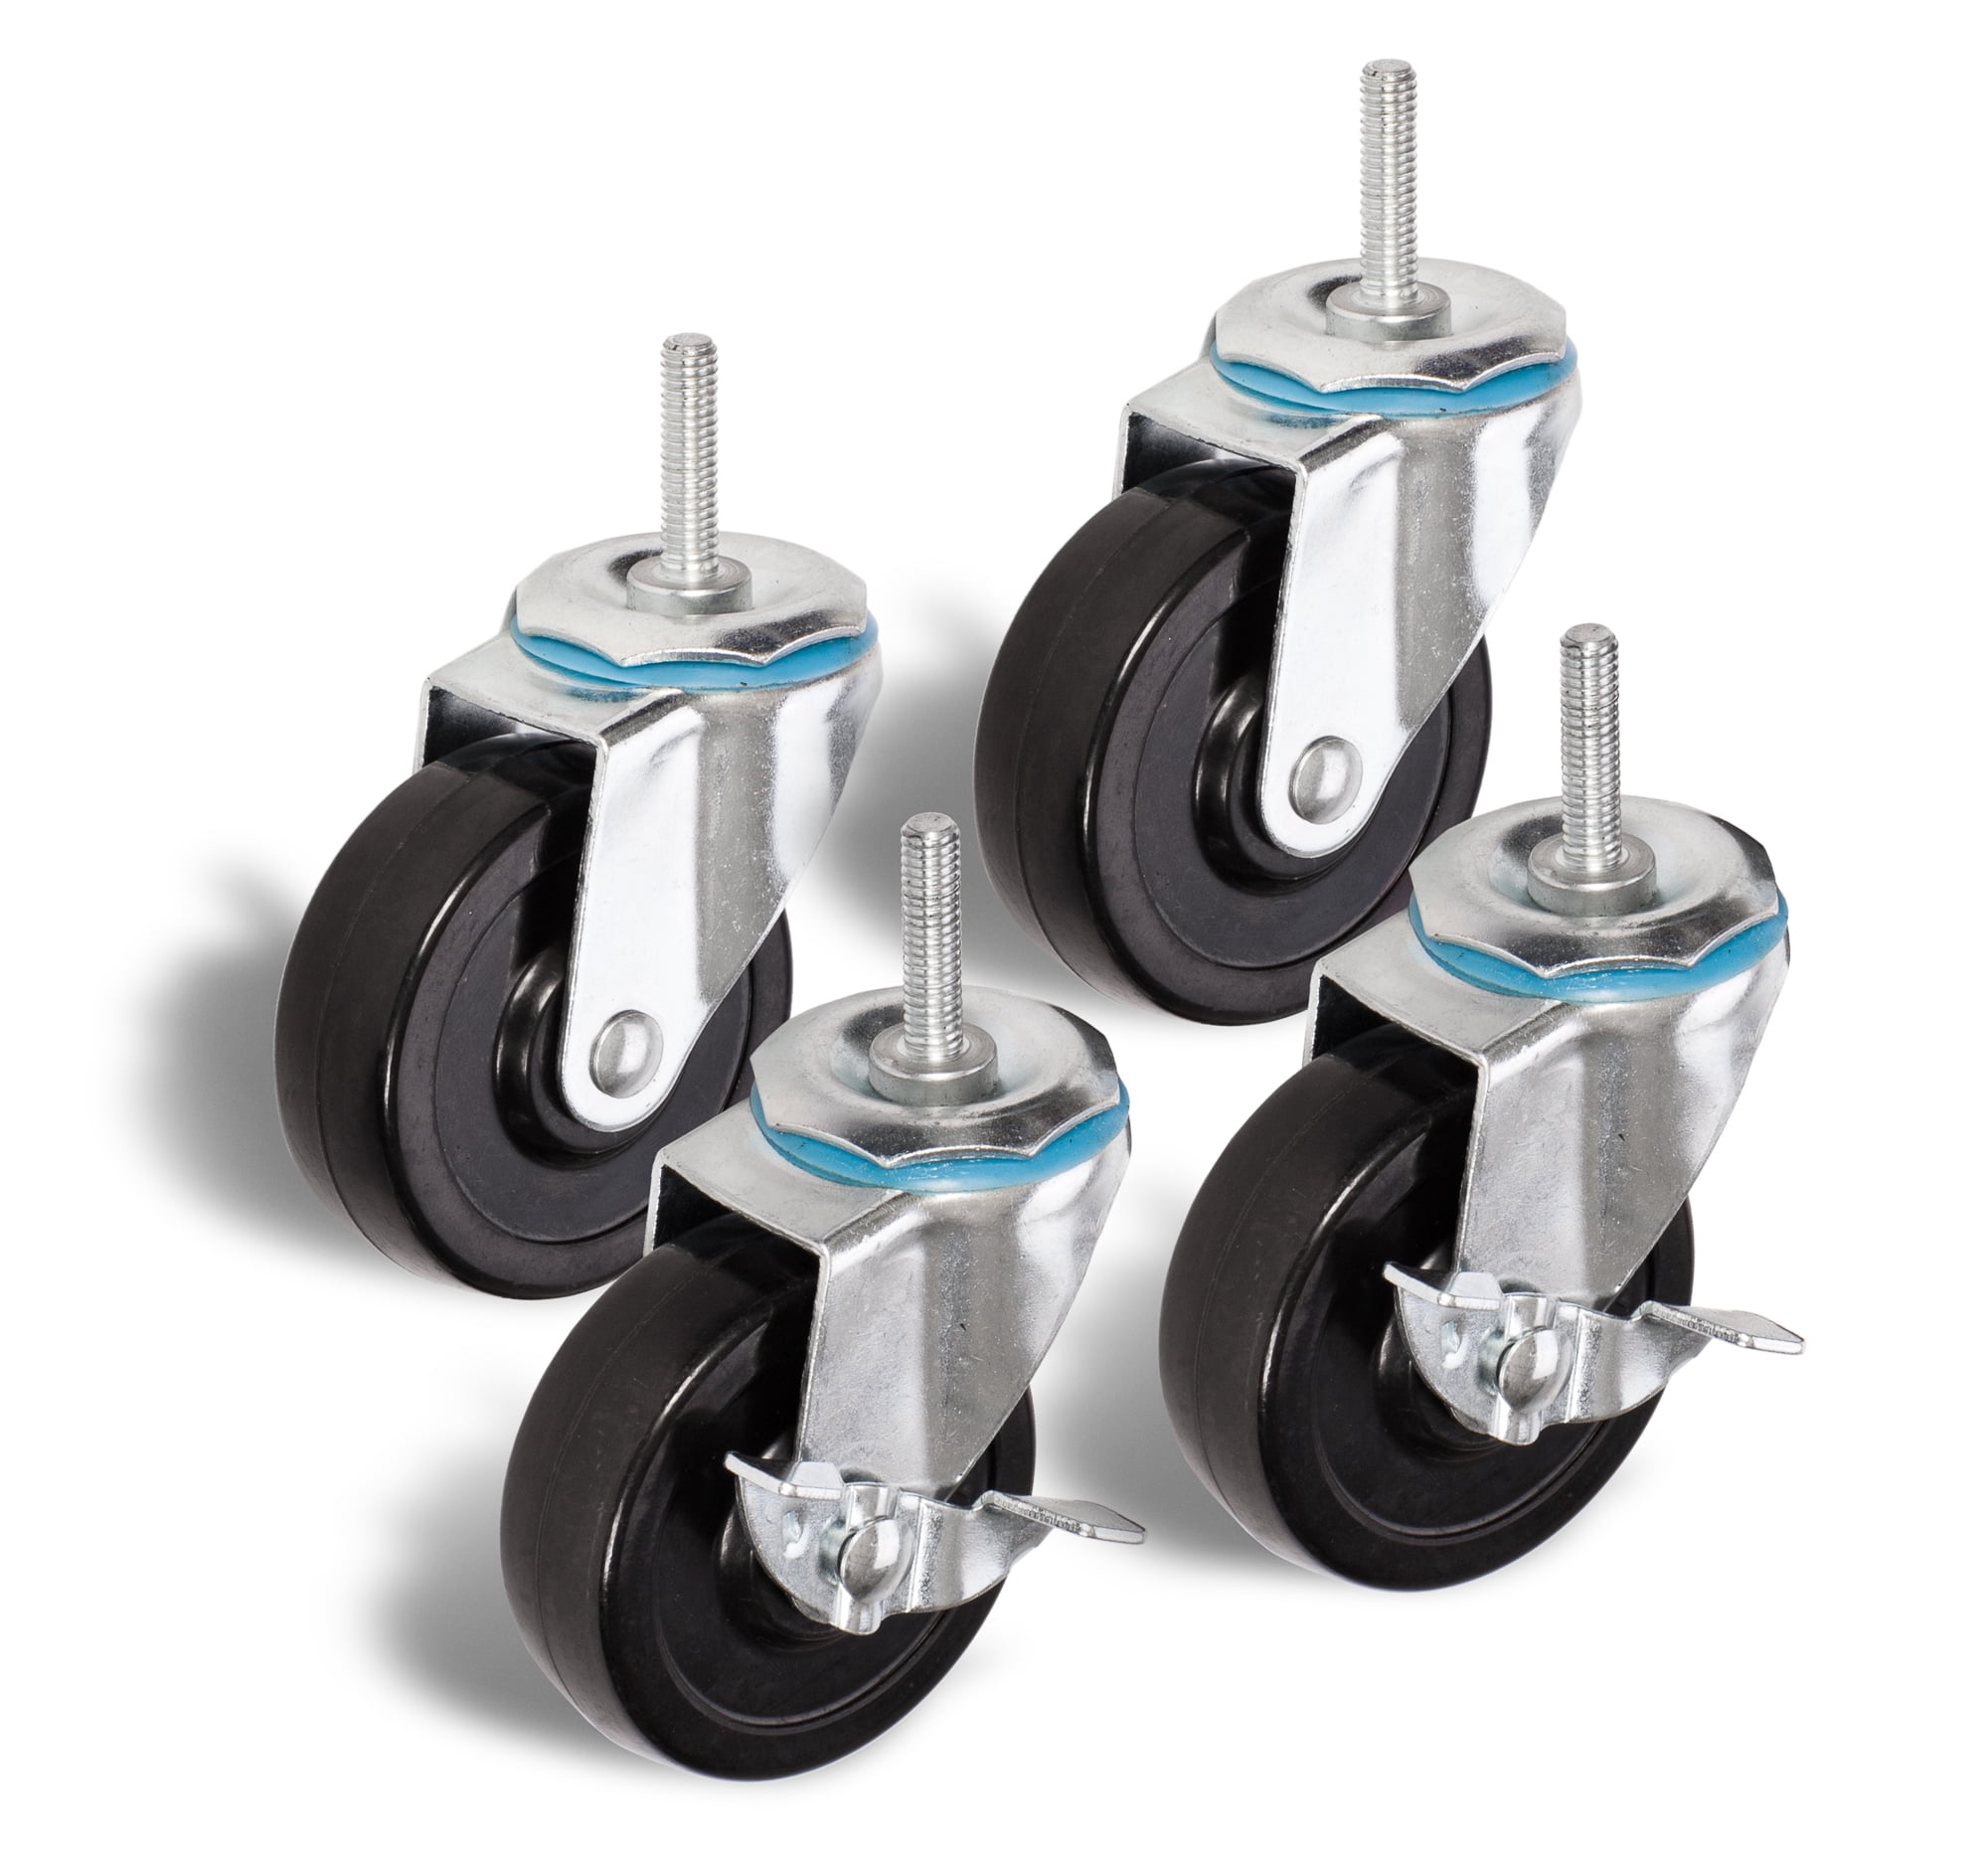 Roller Wheels With Brake Details about   Set of 4 Caforo Locking Metal Bed Frame Casters 